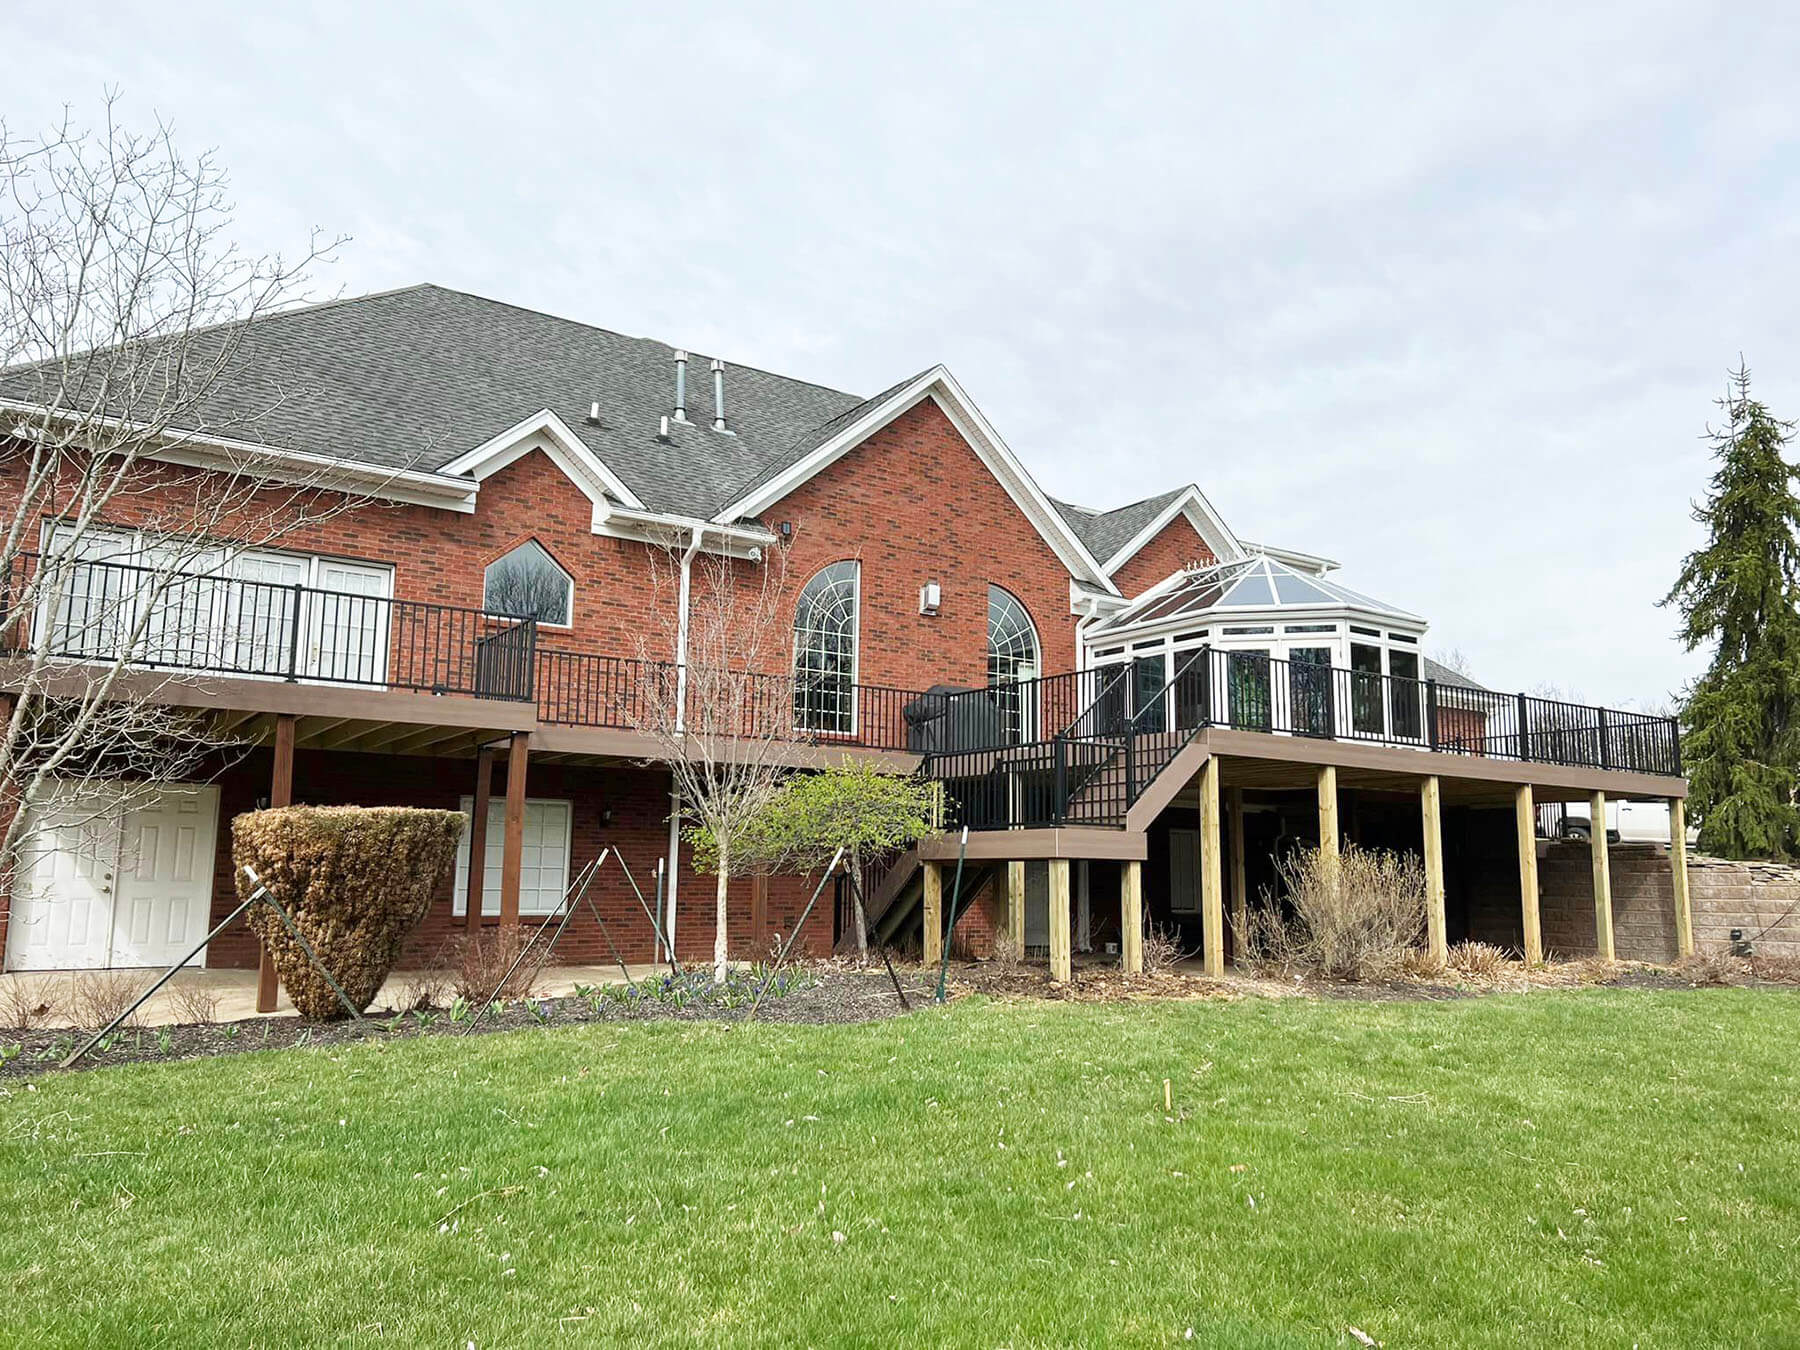 Why Choose Decks Unlimited for Your Louisville Deck Project